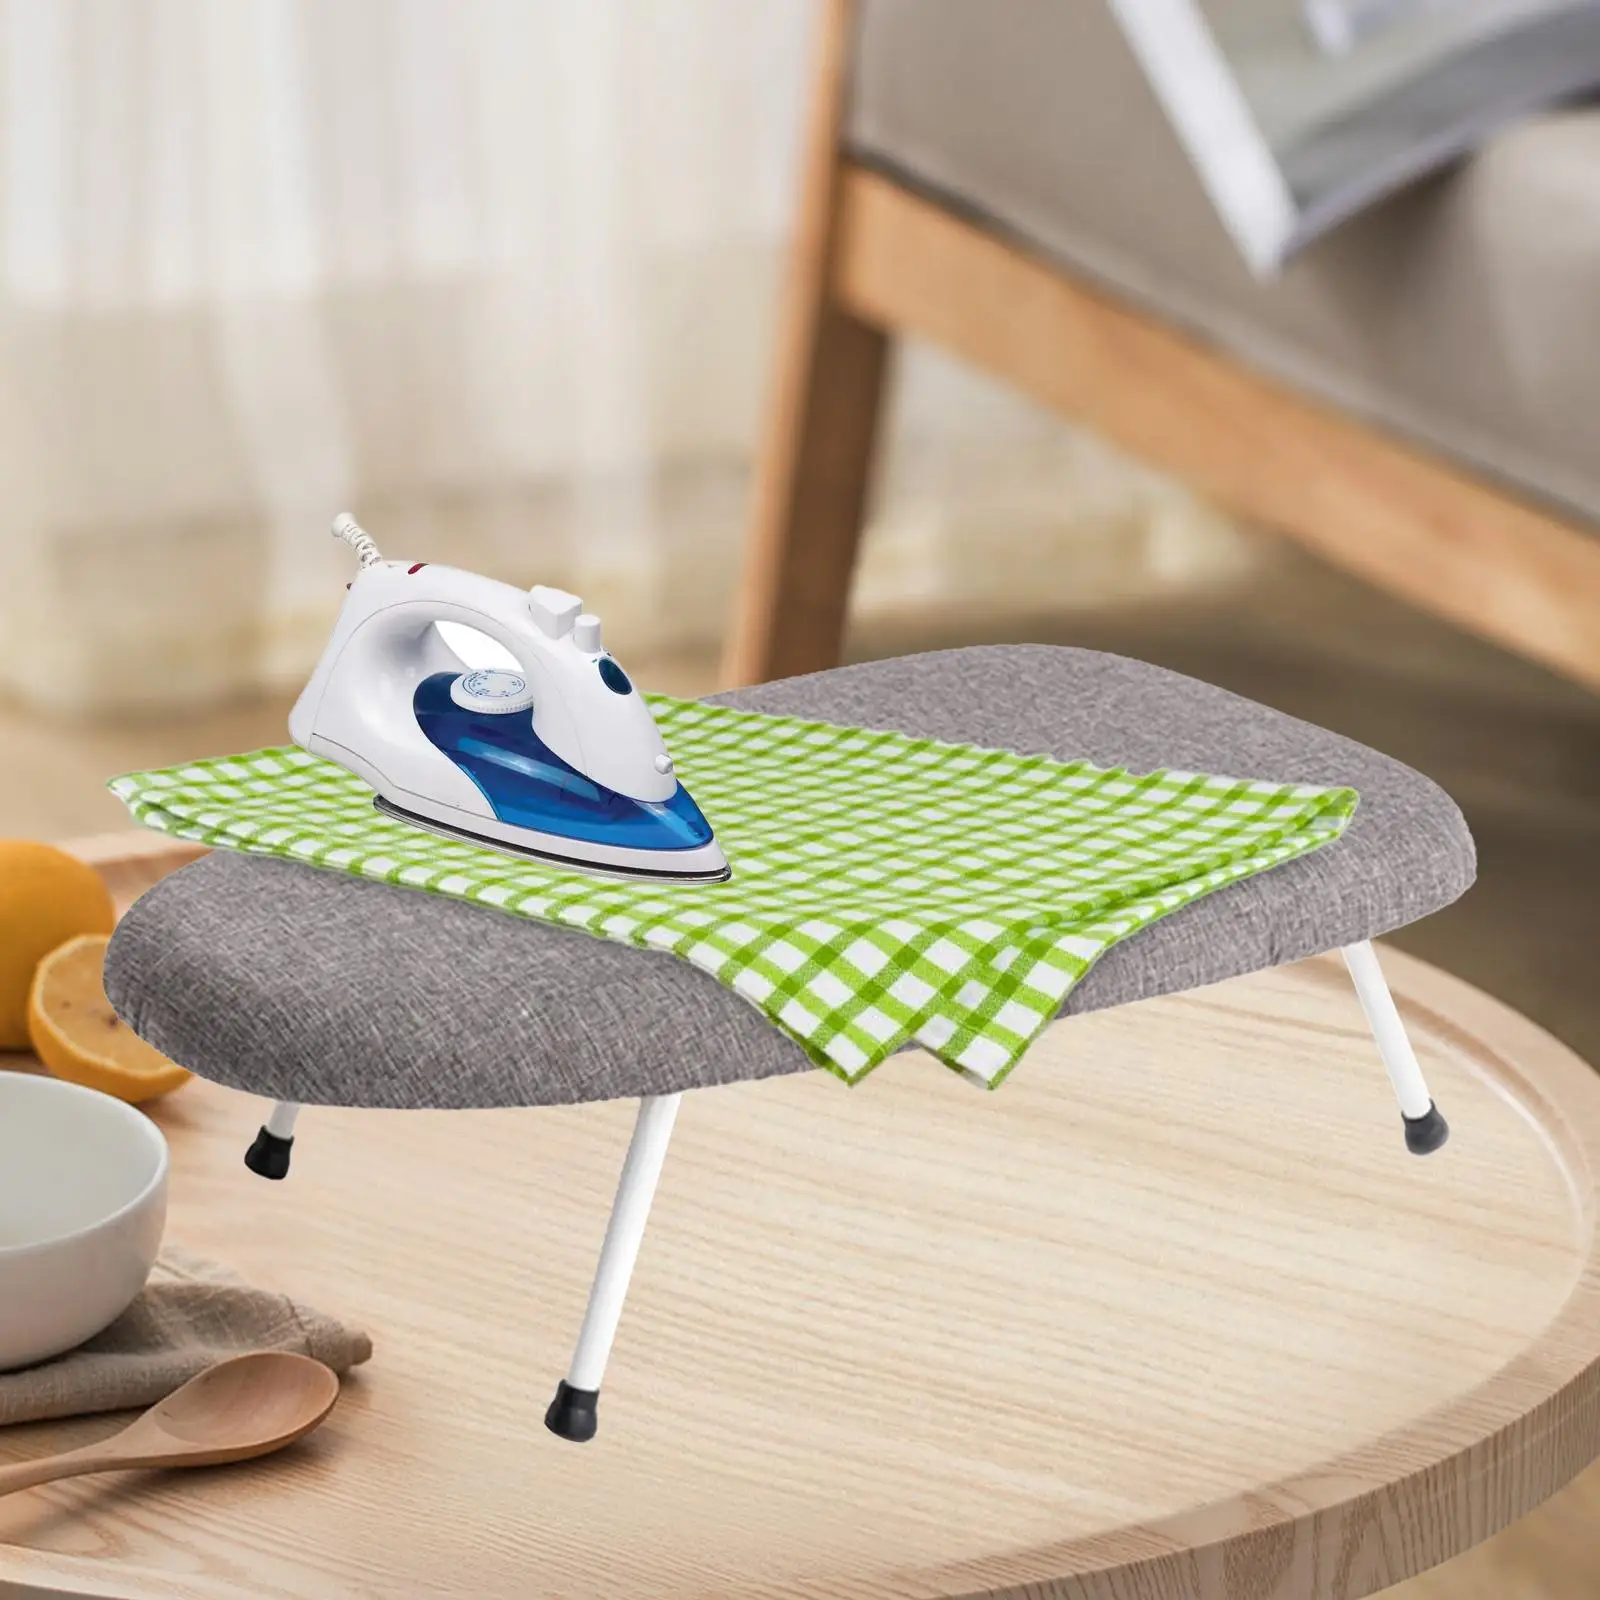 Tabletop Ironing Board Ironing Table Portable for Apartment Dorm Sewing Room